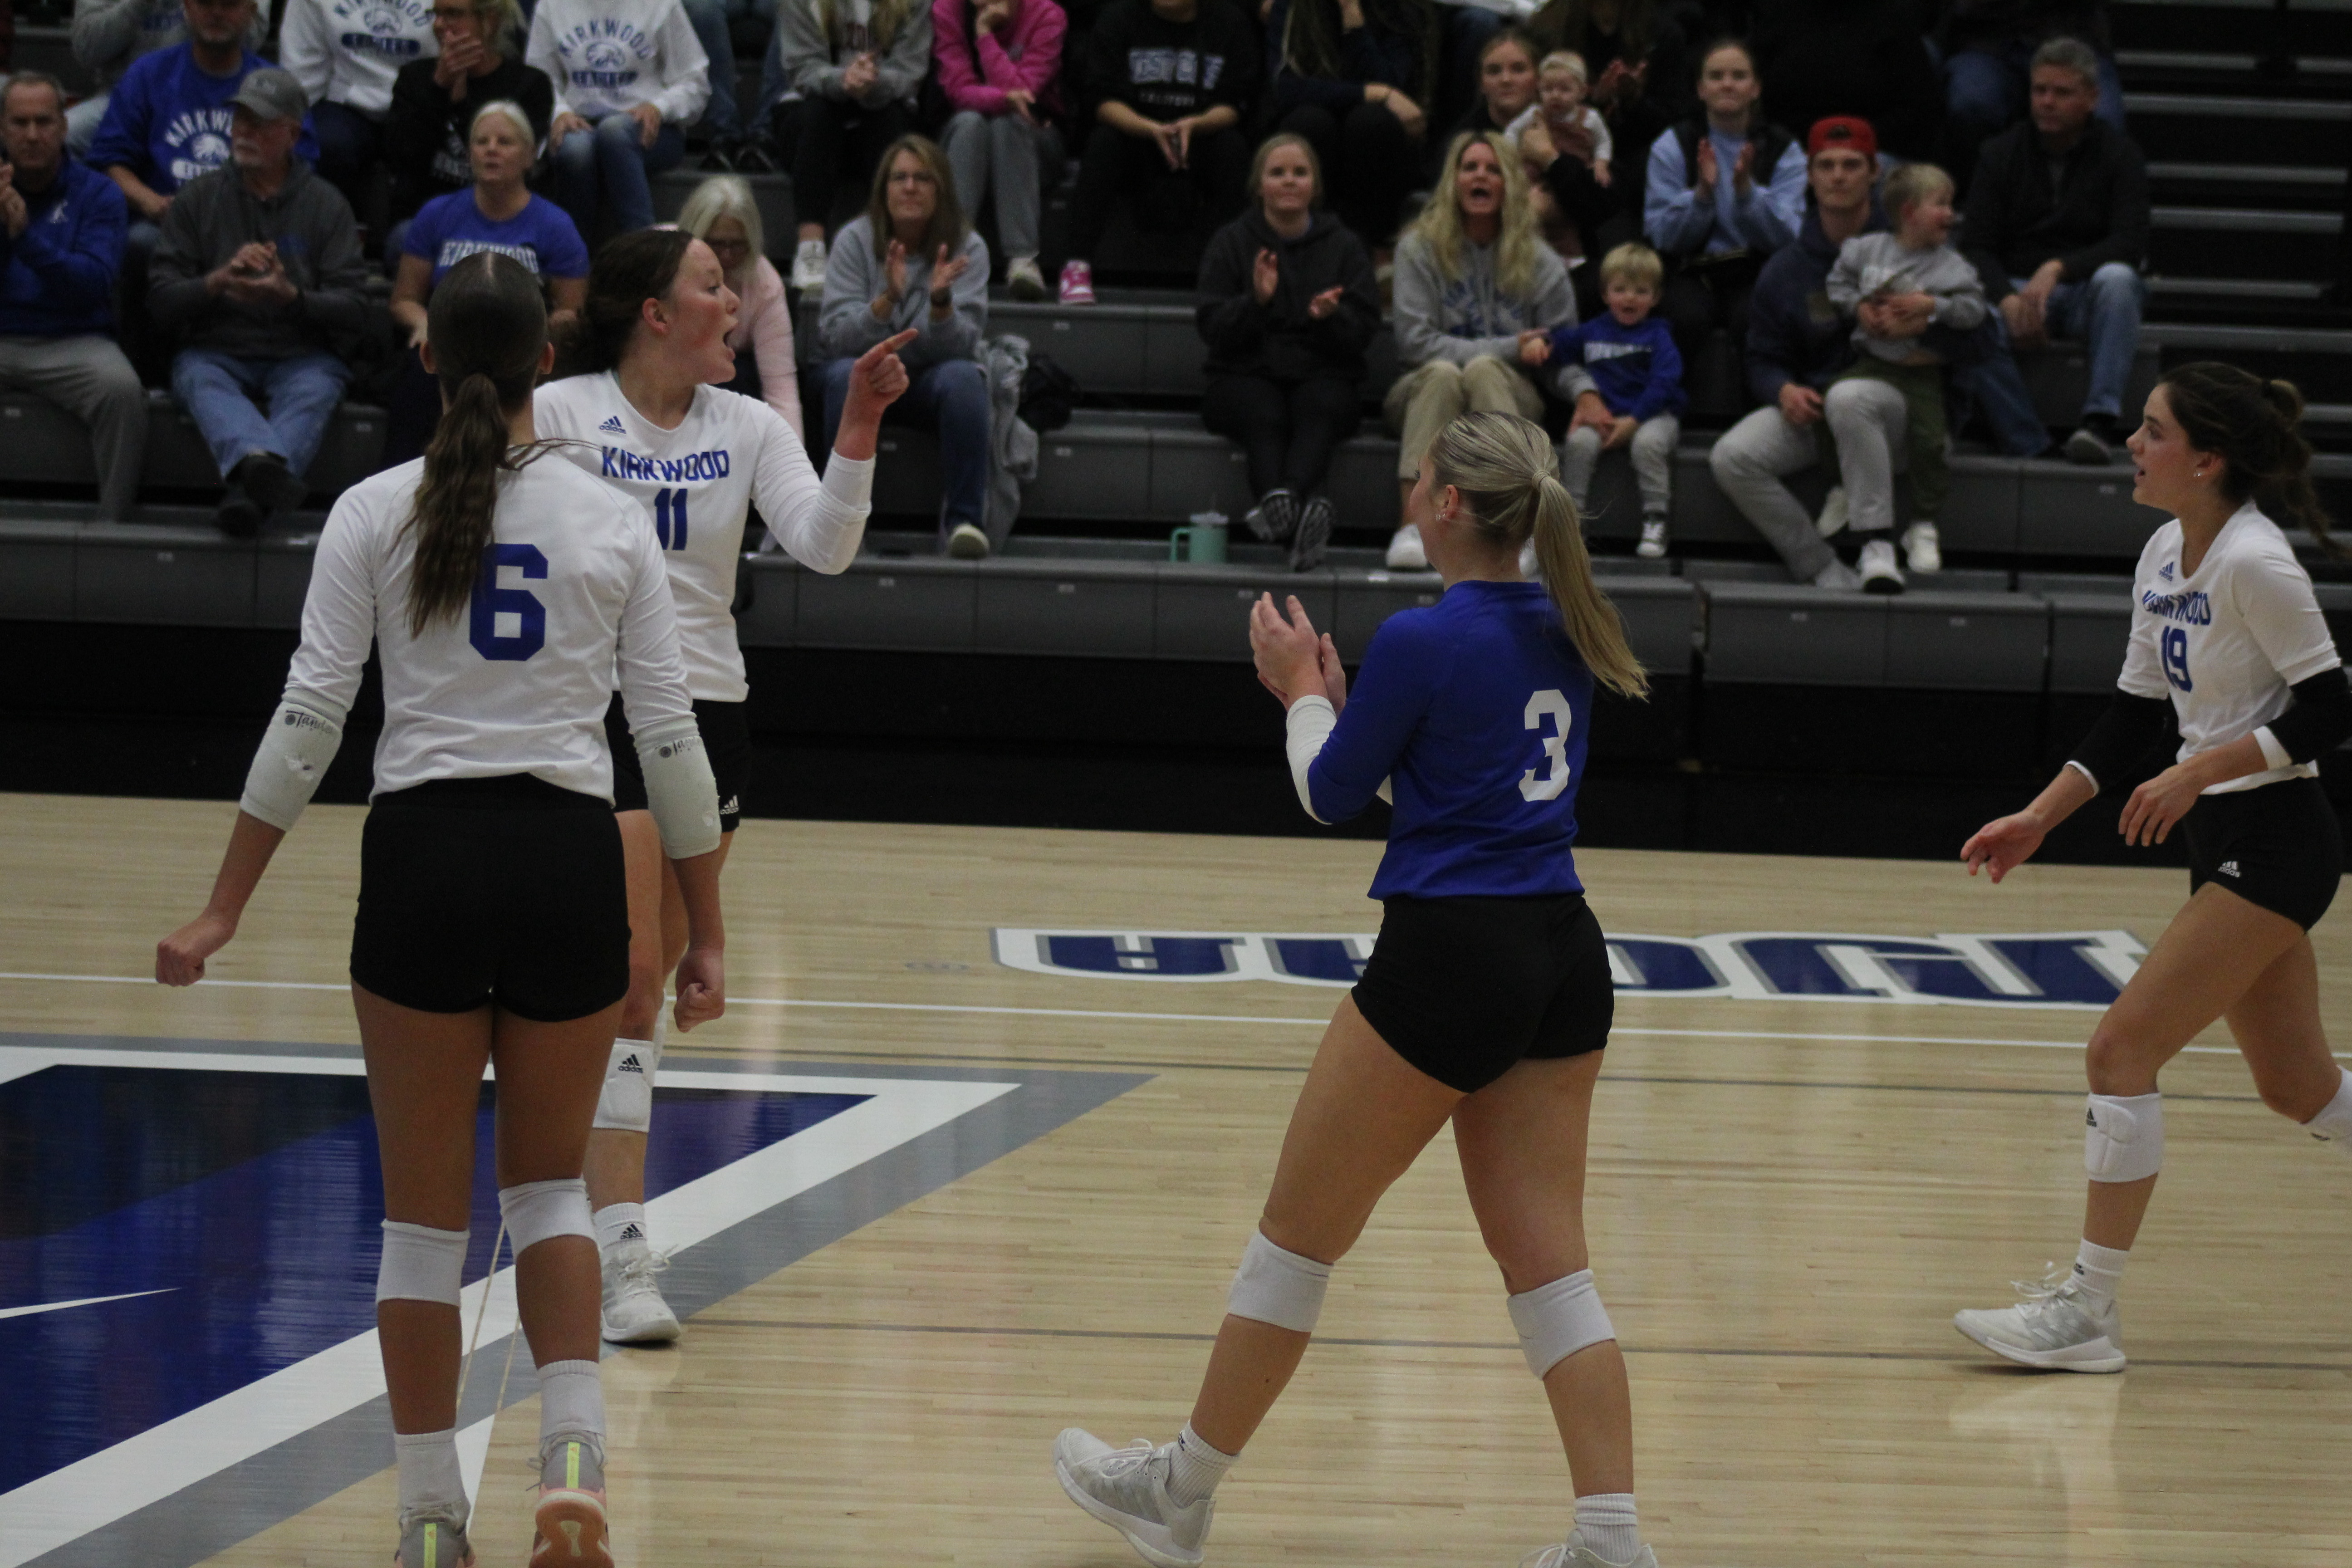 Sydney Matthias pointing at Maggie Lueck after a kill by Lexi Hearn on sophomore night against Hawkeye Community College.